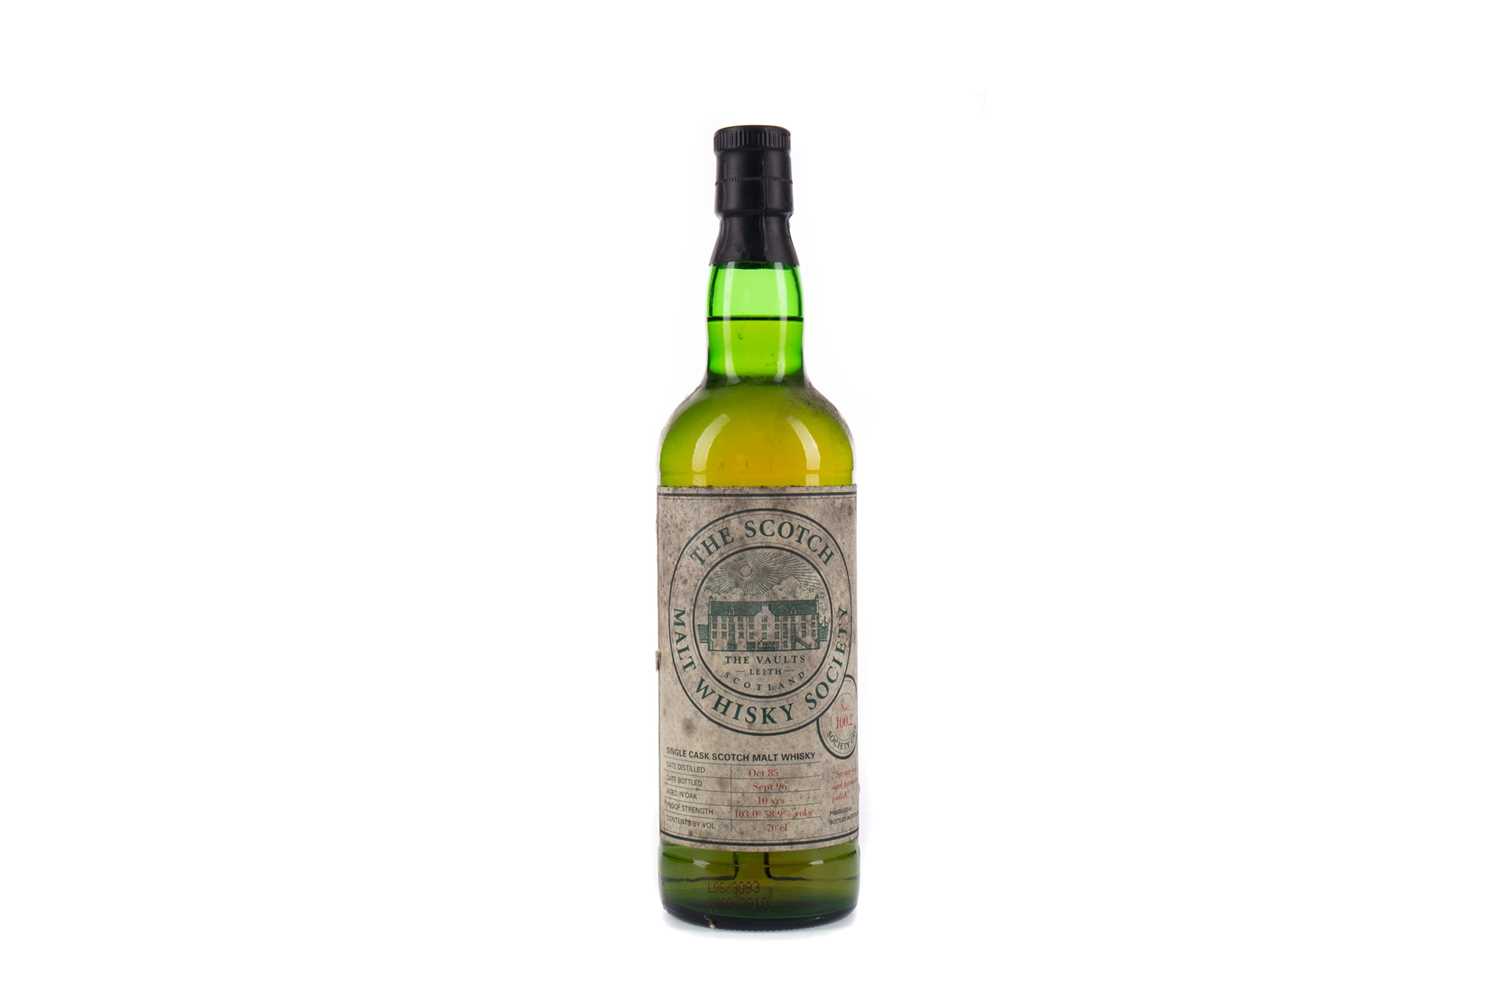 Lot 87 - STRATHMILL 1985 SMWS 100.2 AGED 10 YEARS